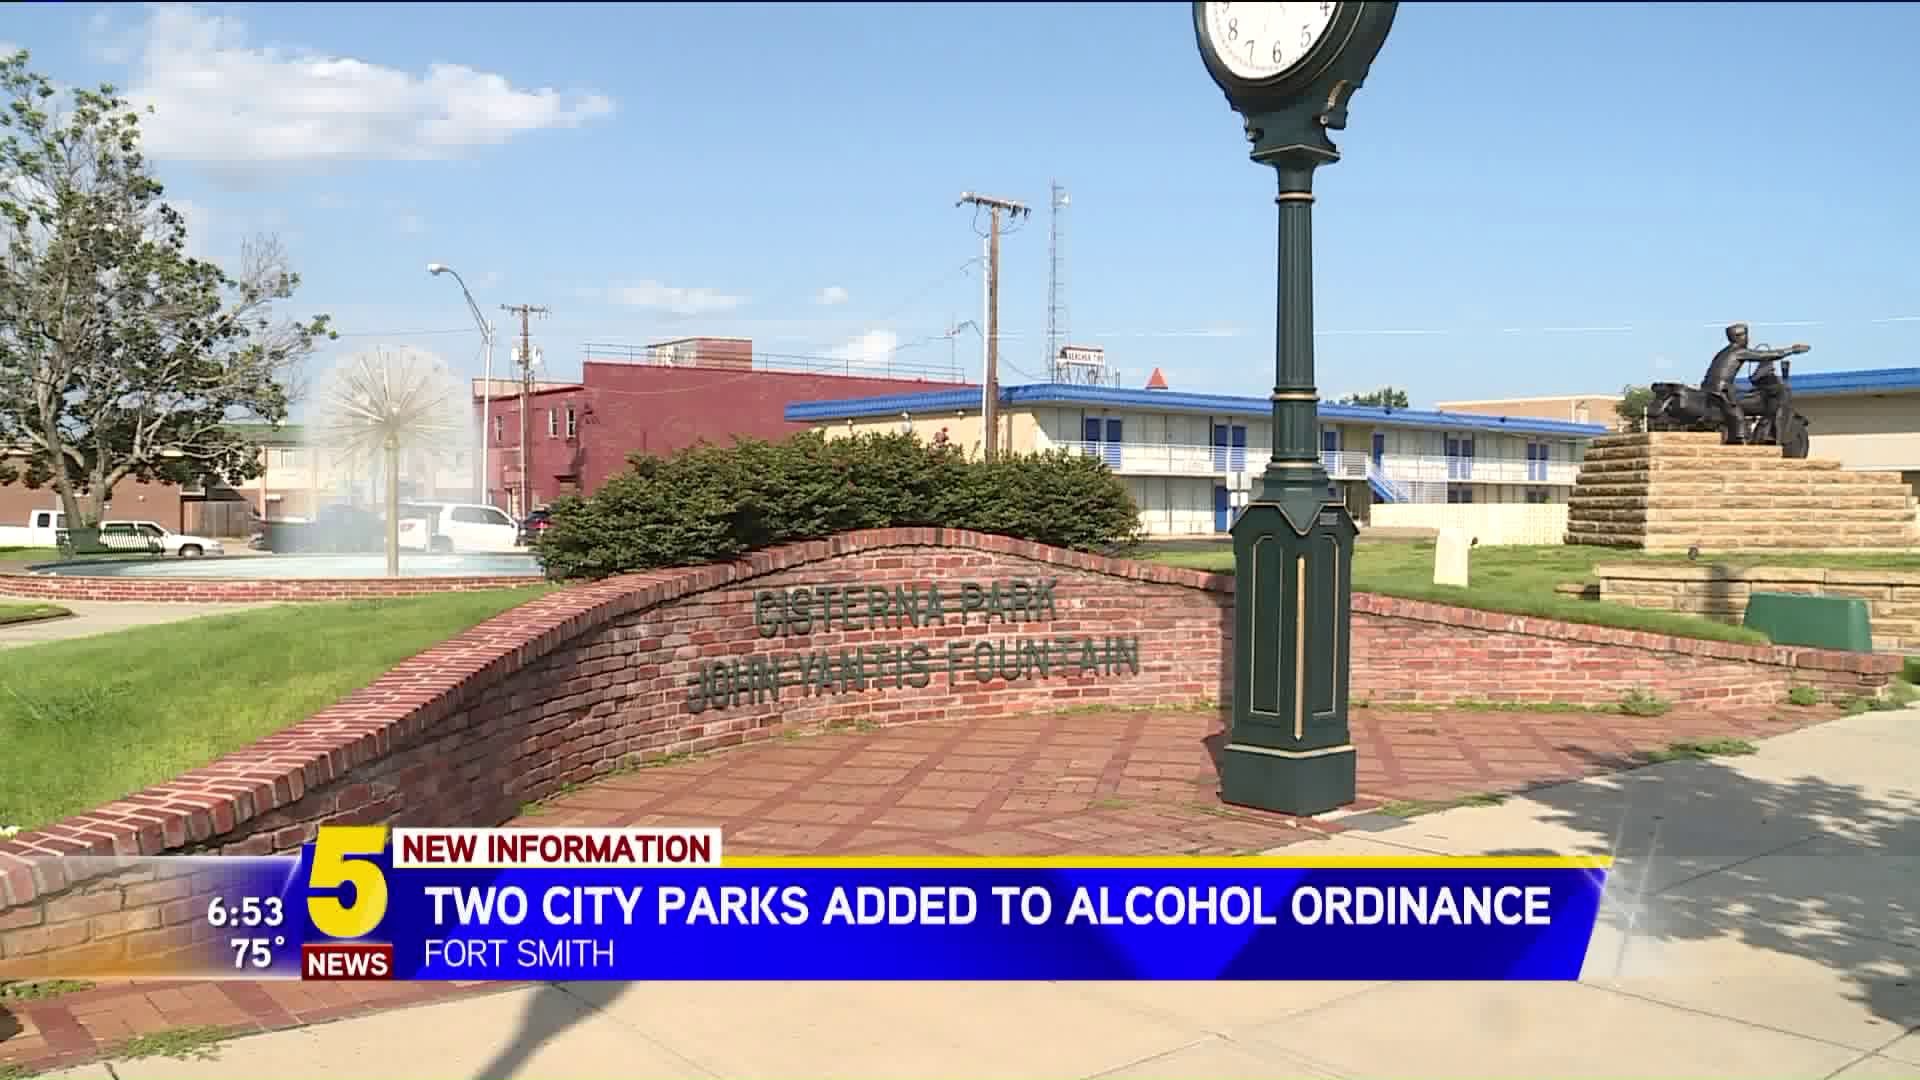 City parks added to alcohol ordinance